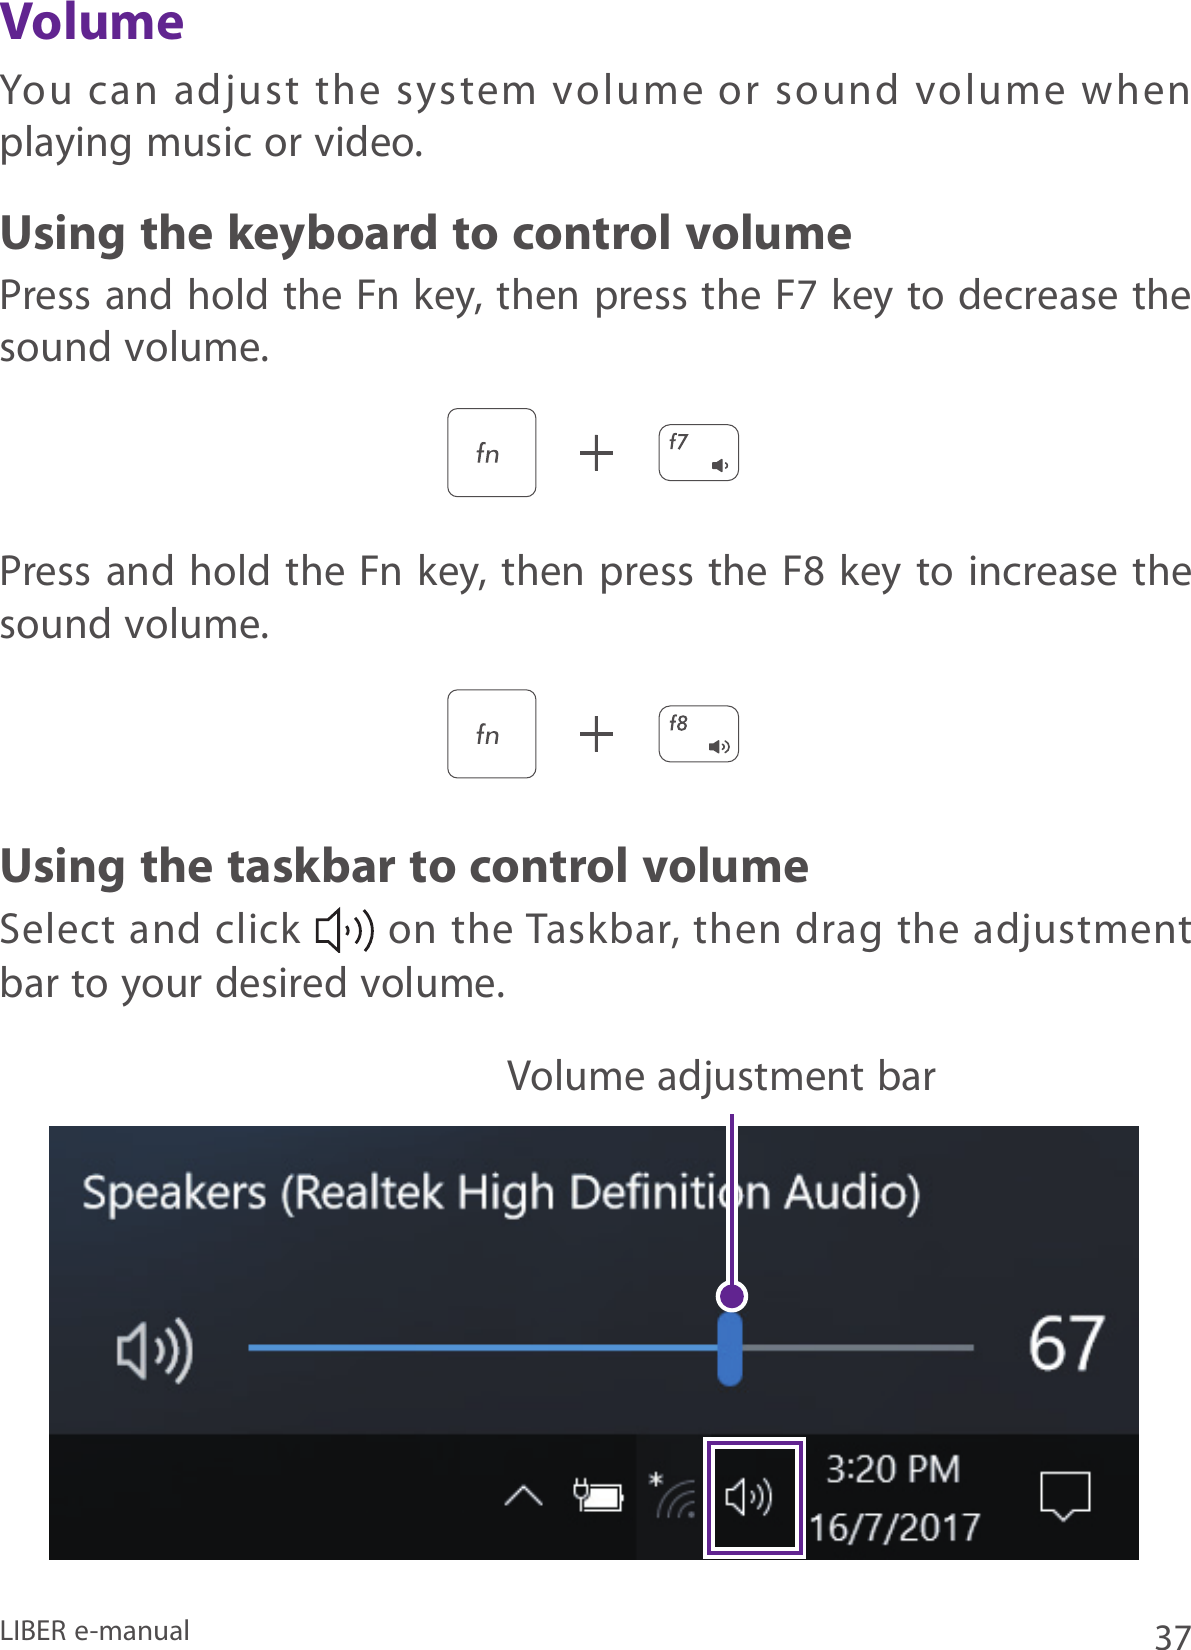 37LIBER e-manualYou  can  adjust  the  system  volume  or  sound  volume  when playing music or video.Press and hold the Fn key, then press the F7 key to decrease the sound volume.Press and hold the Fn  key, then press the F8 key to increase the sound volume.Select and click   on the Taskbar,  then  drag the adjustment bar to your desired volume.Using the keyboard to control volumeVolumeUsing the taskbar to control volumeVolume adjustment bar